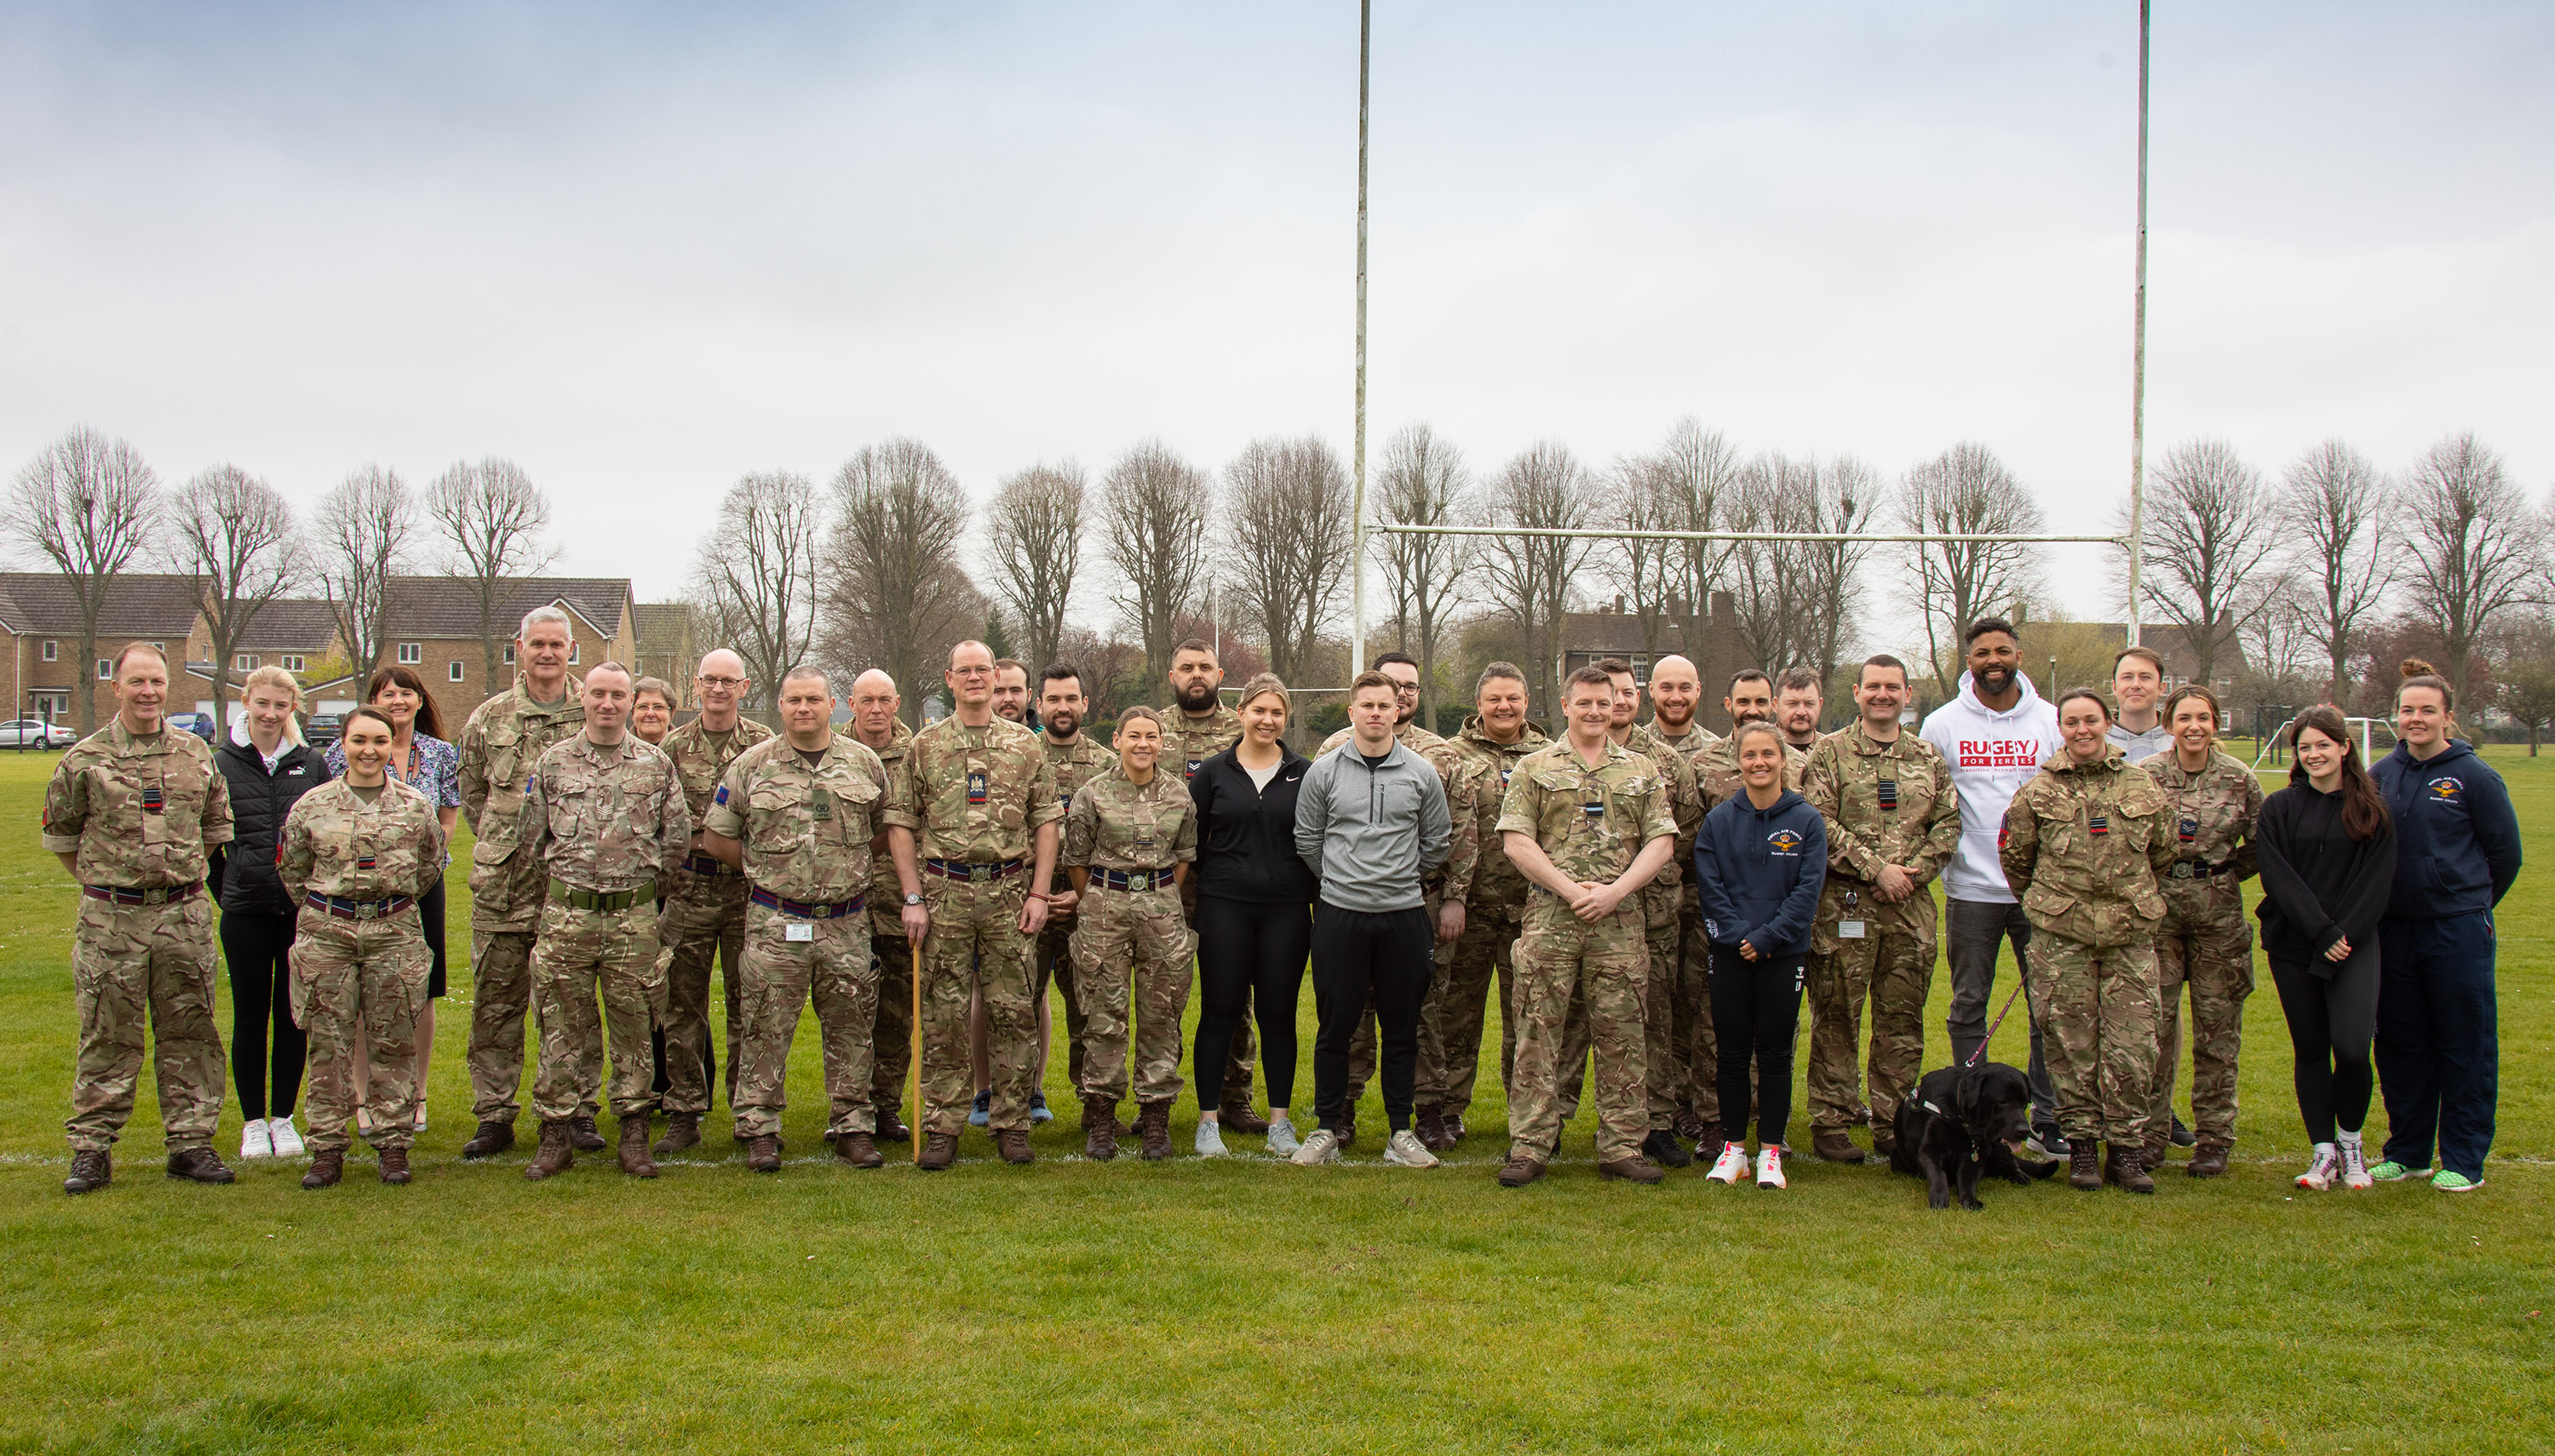 Personnel group photo on the rugby pitch.